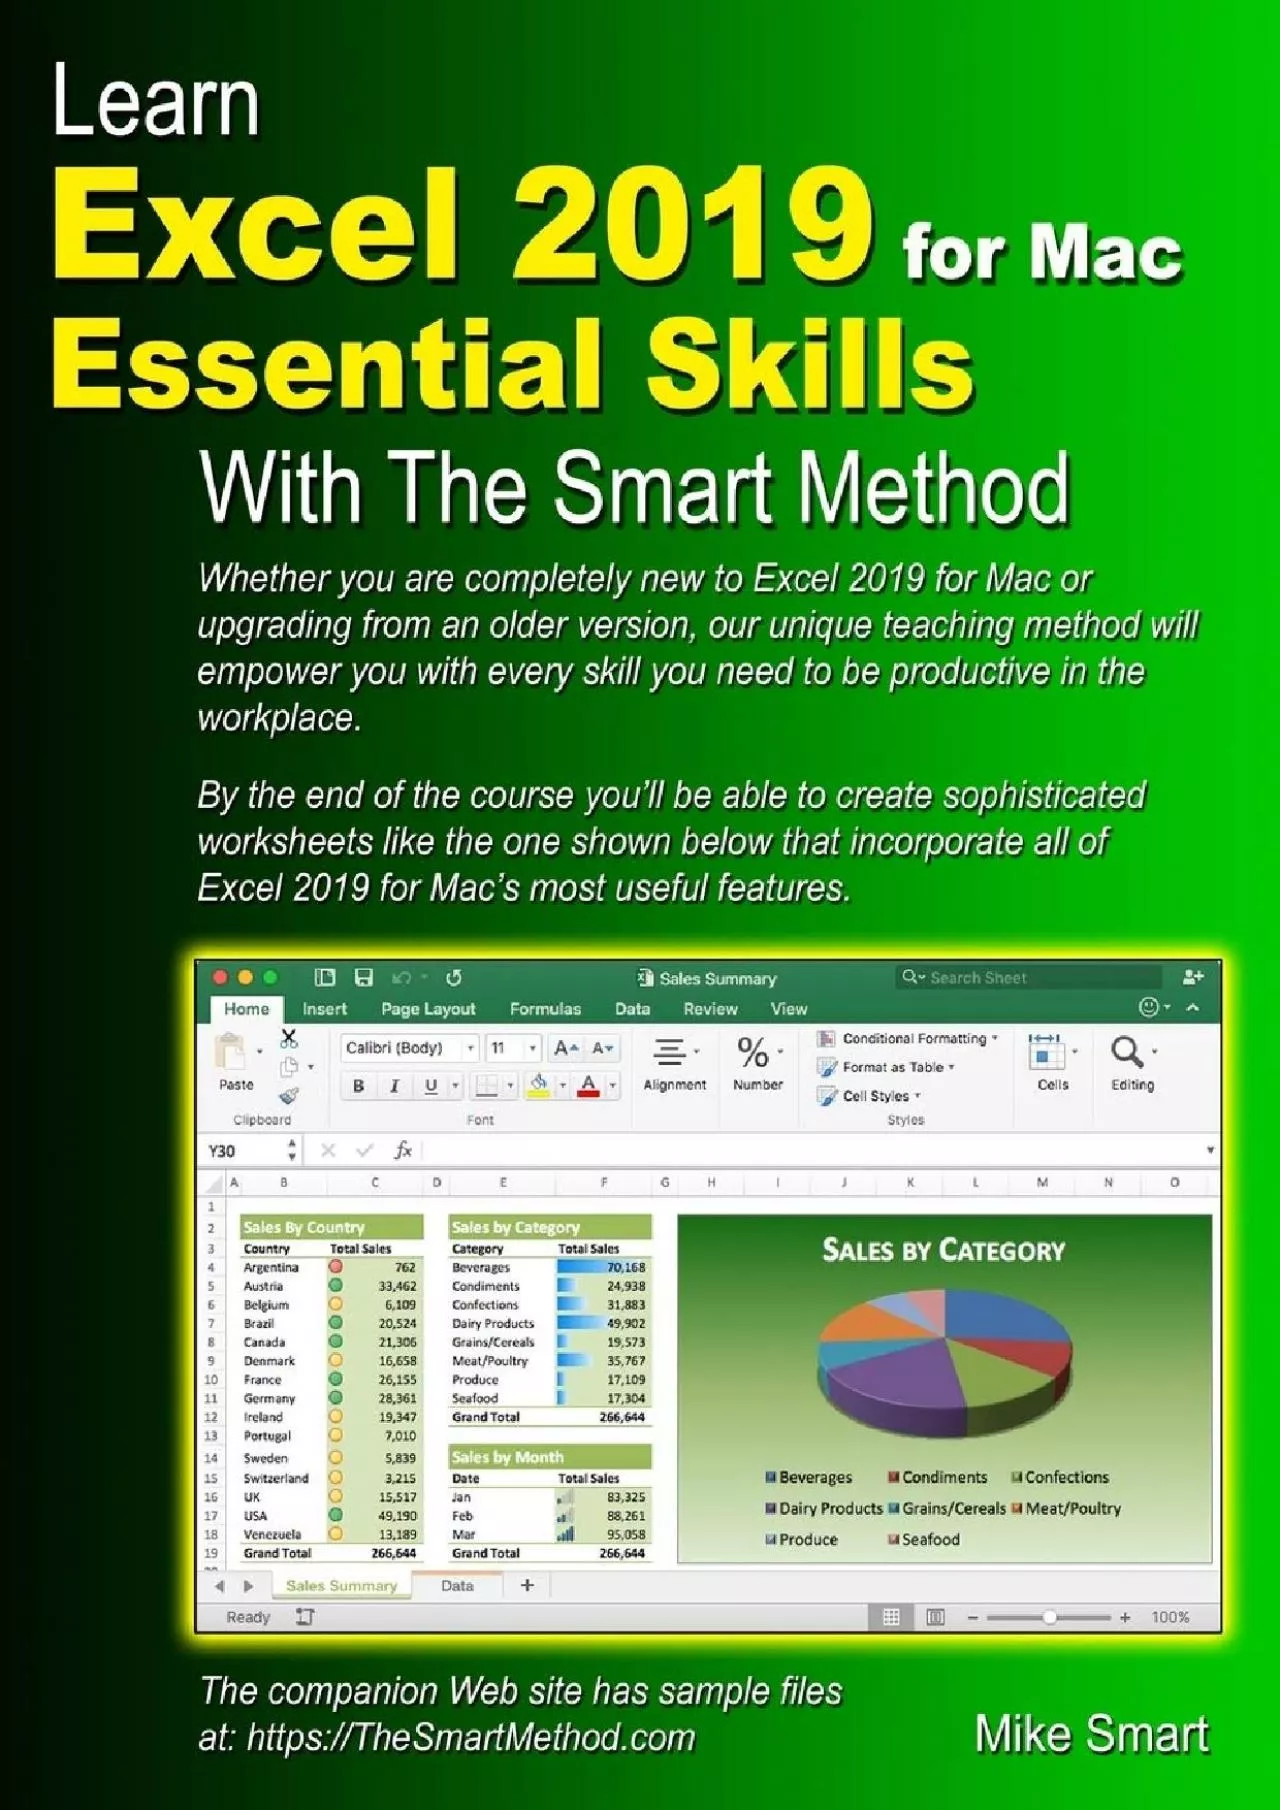 Learn Excel 2019 for Mac Essential Skills with The Smart Method: Courseware tutorial for